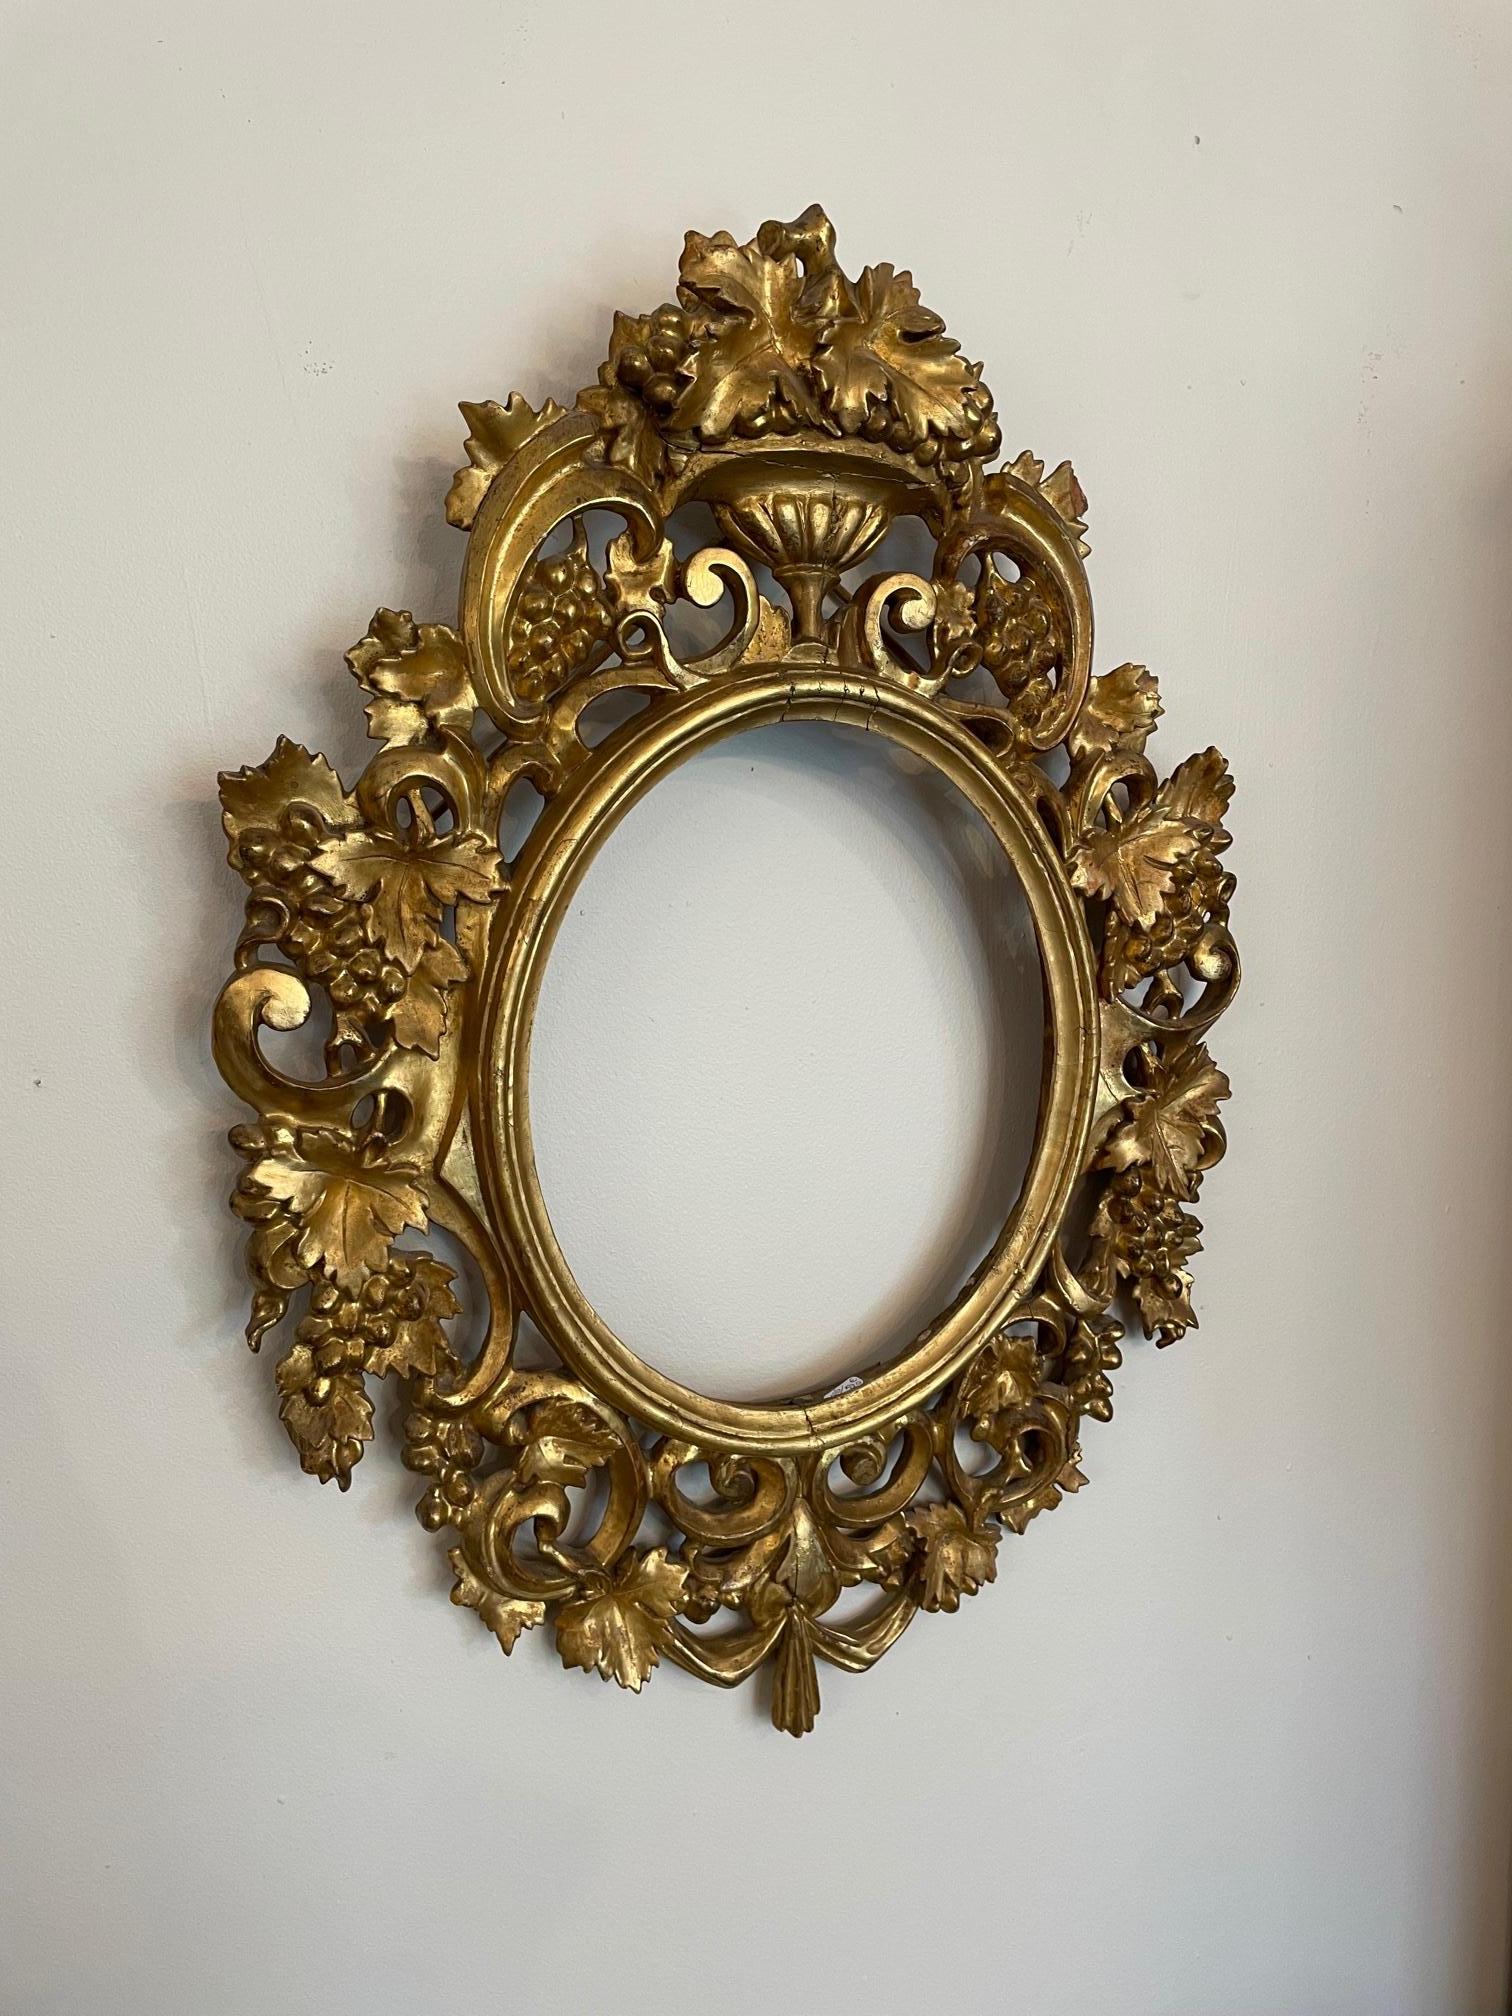 Beautiful 18th century French hand carved golden wood frame with grapes decor. 
Between Louis XV and Louis XVI style. 
Very nice quality and condition.